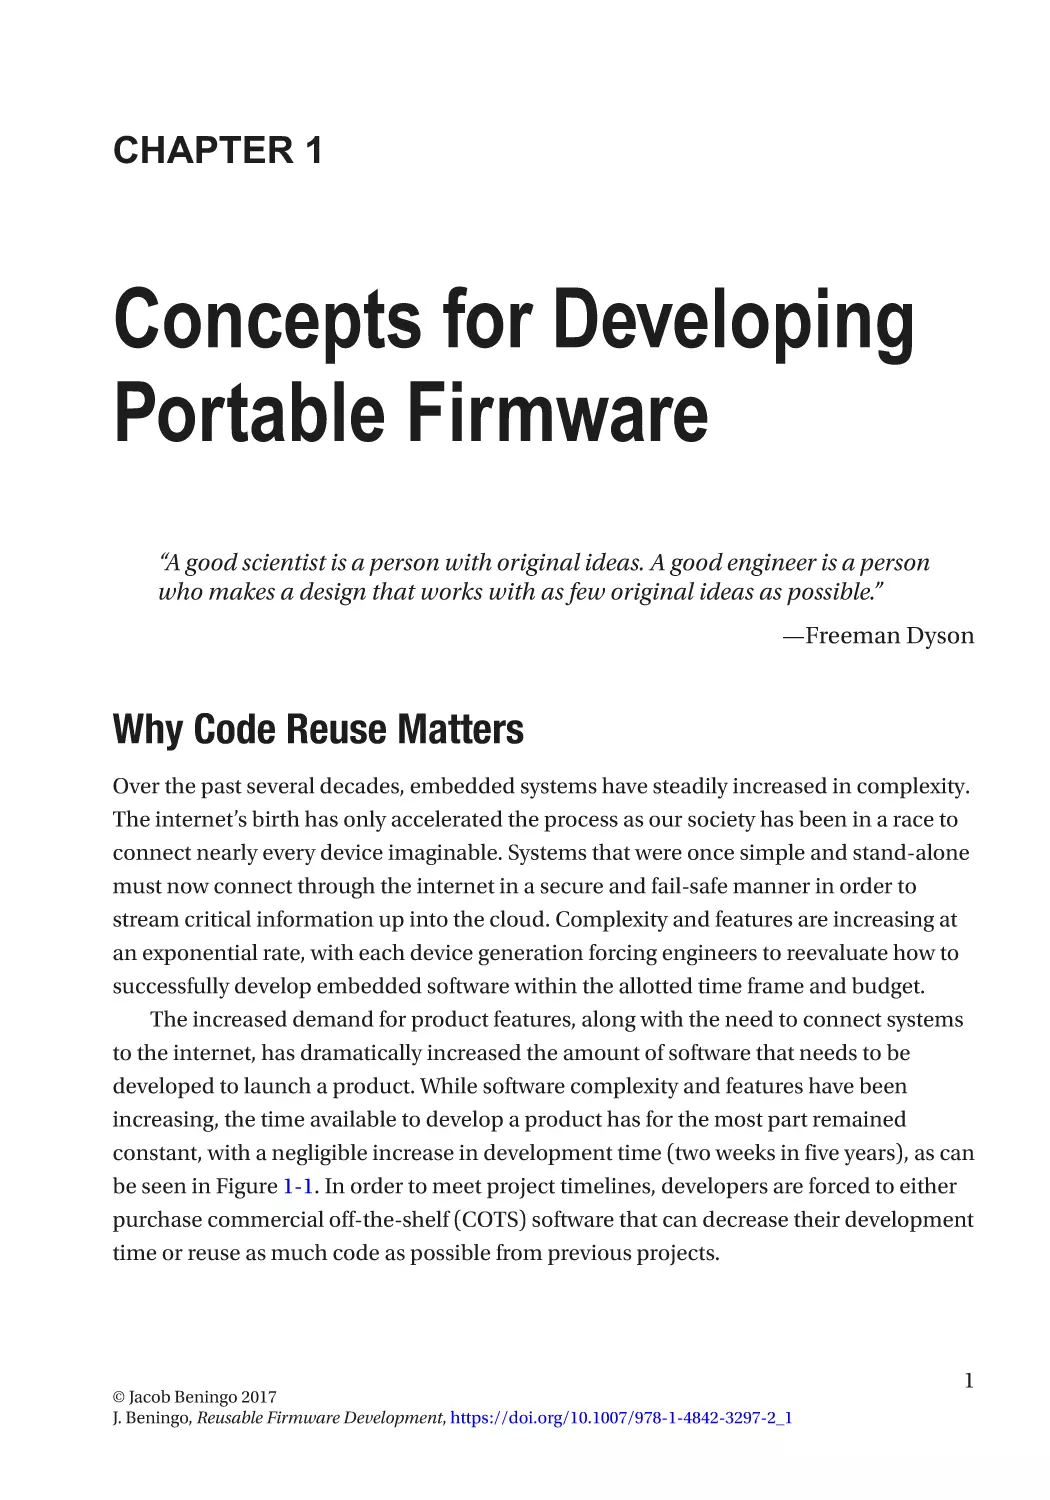 Chapter 1
Why Code Reuse Matters